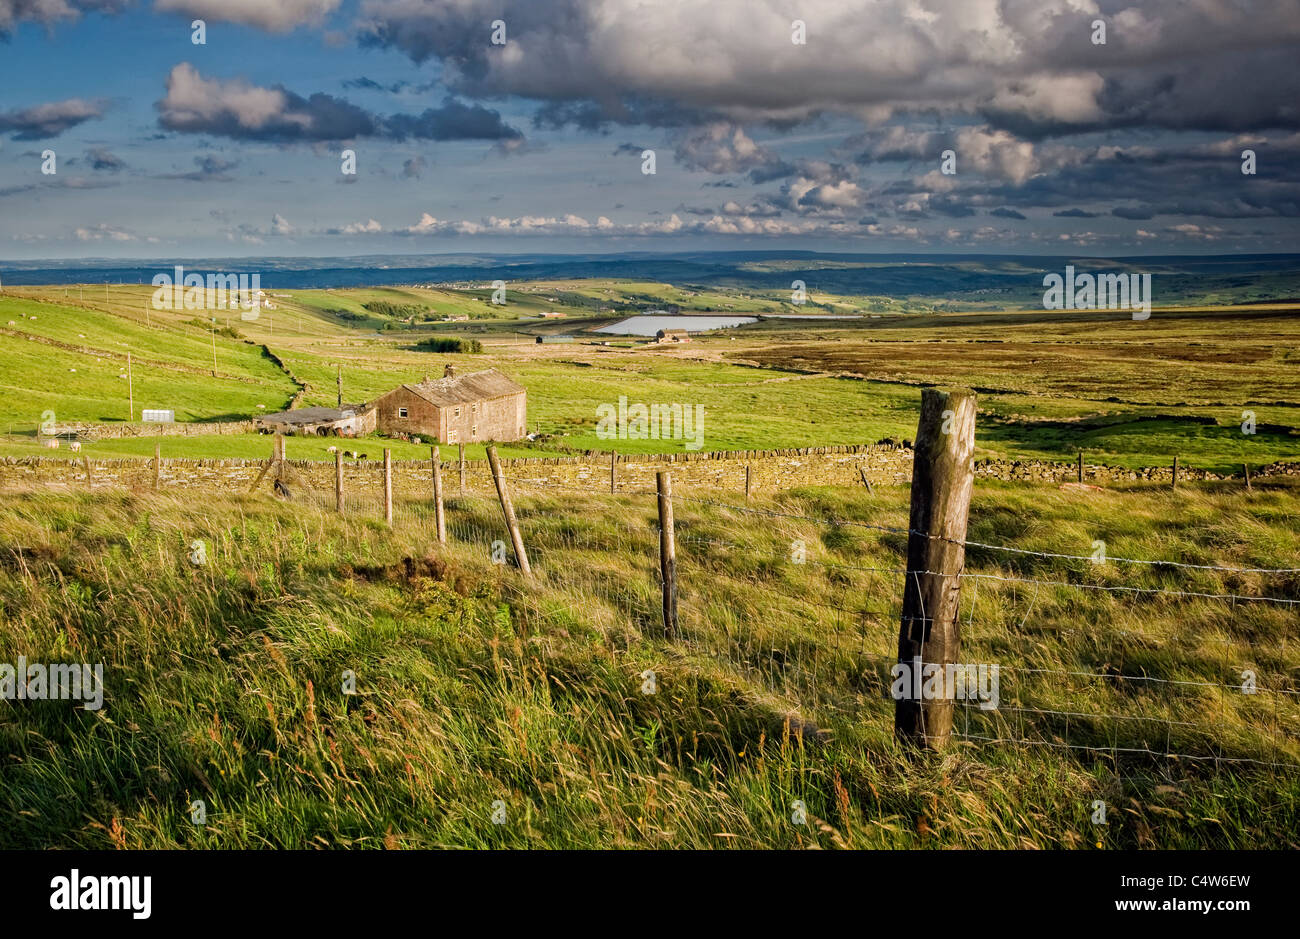 Pennine farm on windswept moorland above calderdale in the yorkshire dales. Stock Photo